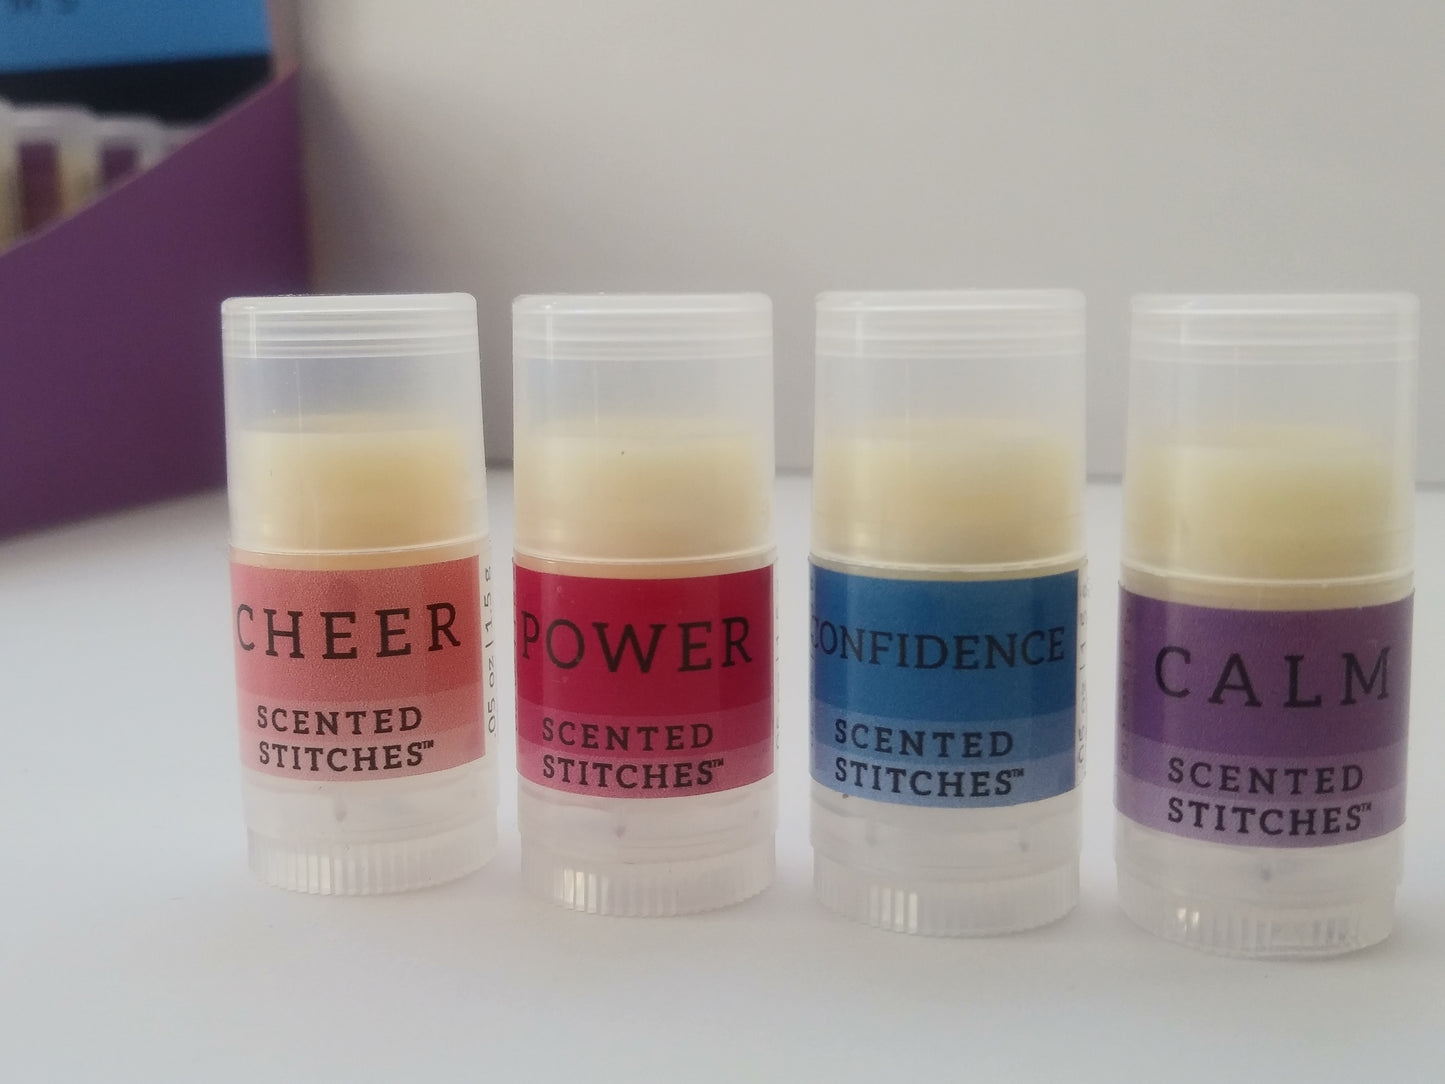 Scented Stitches - Sample Kit Balms Included